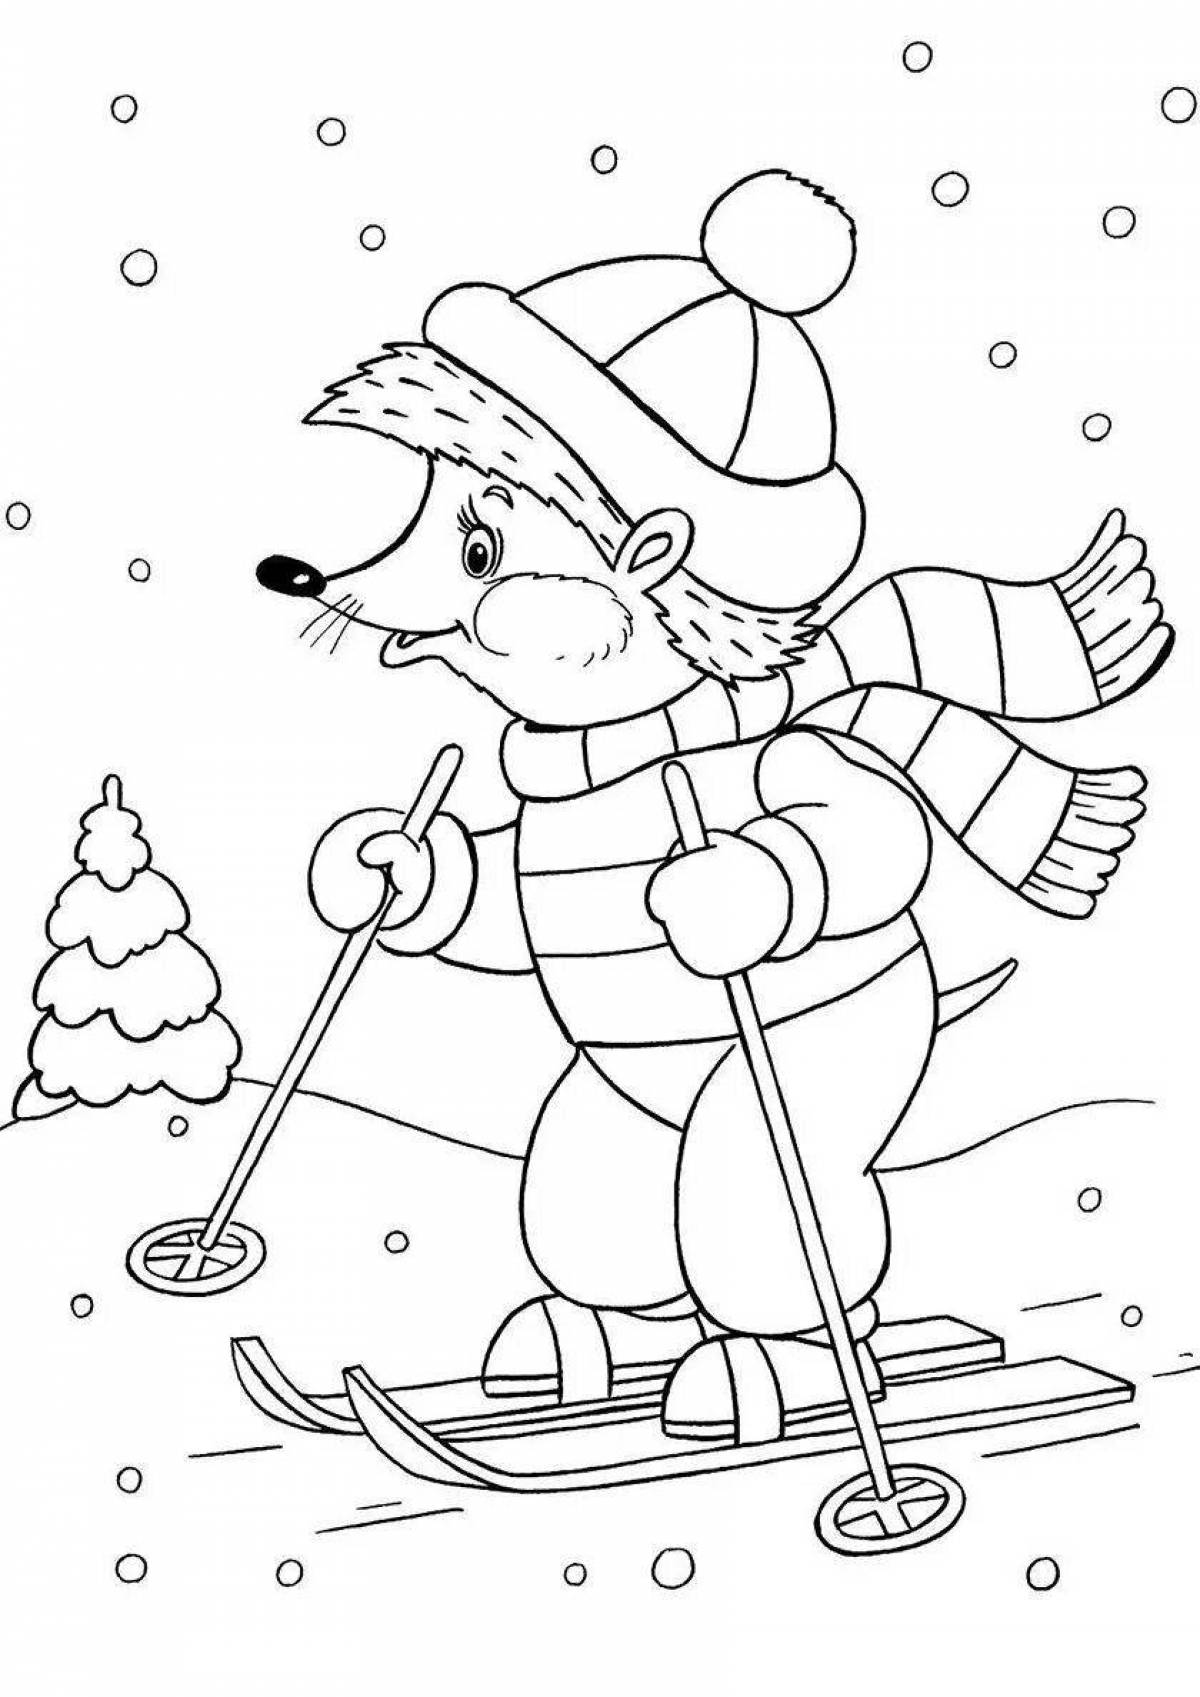 Playful winter coloring for children 2 3